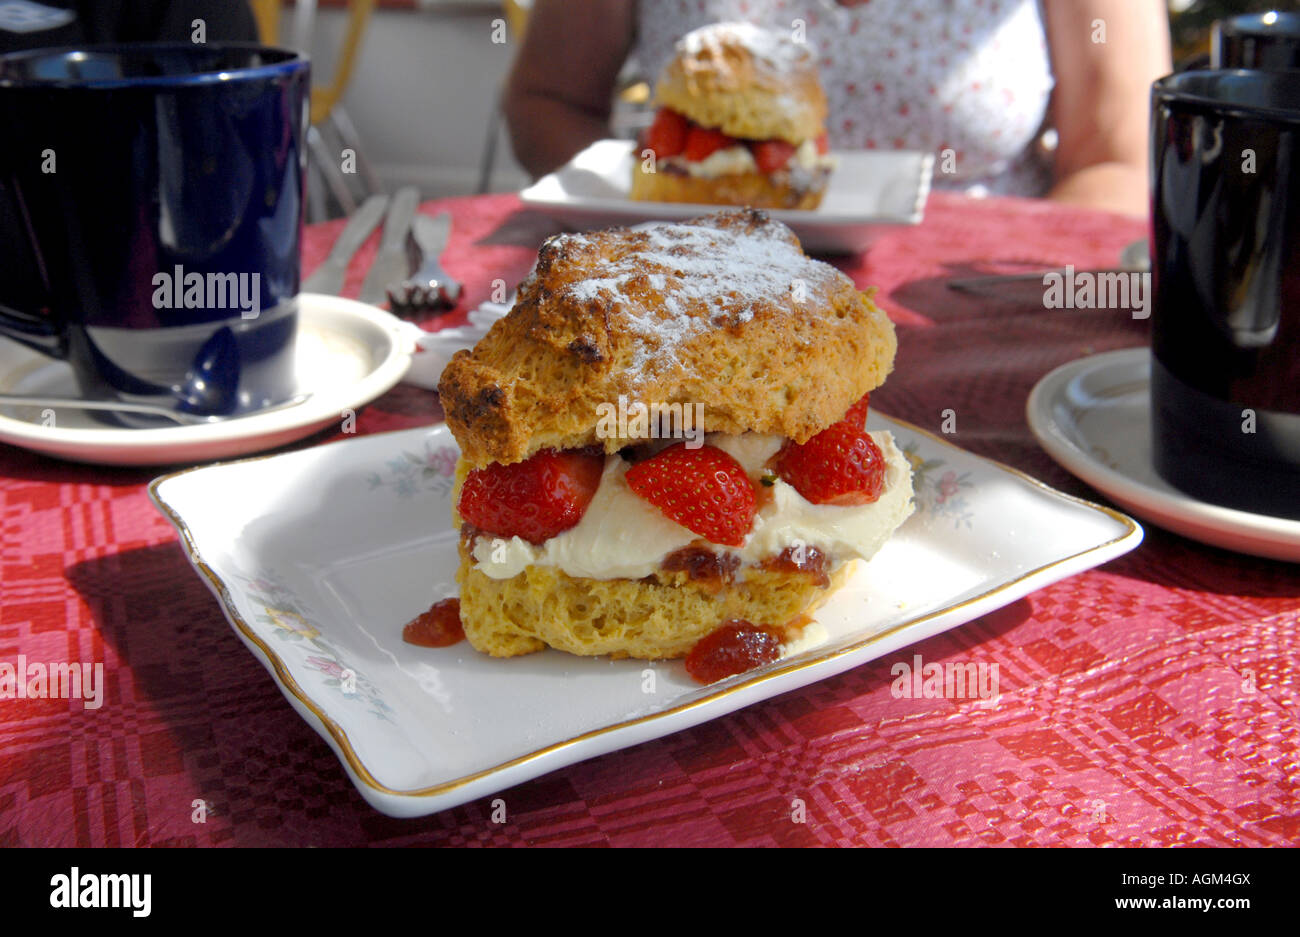 A DEVONSHIRE CREAM SCONE  WITH STRAWBERRIES RE FOOD CALORIES DIETS DIETING SUGAR OBESITY ETC UK Stock Photo